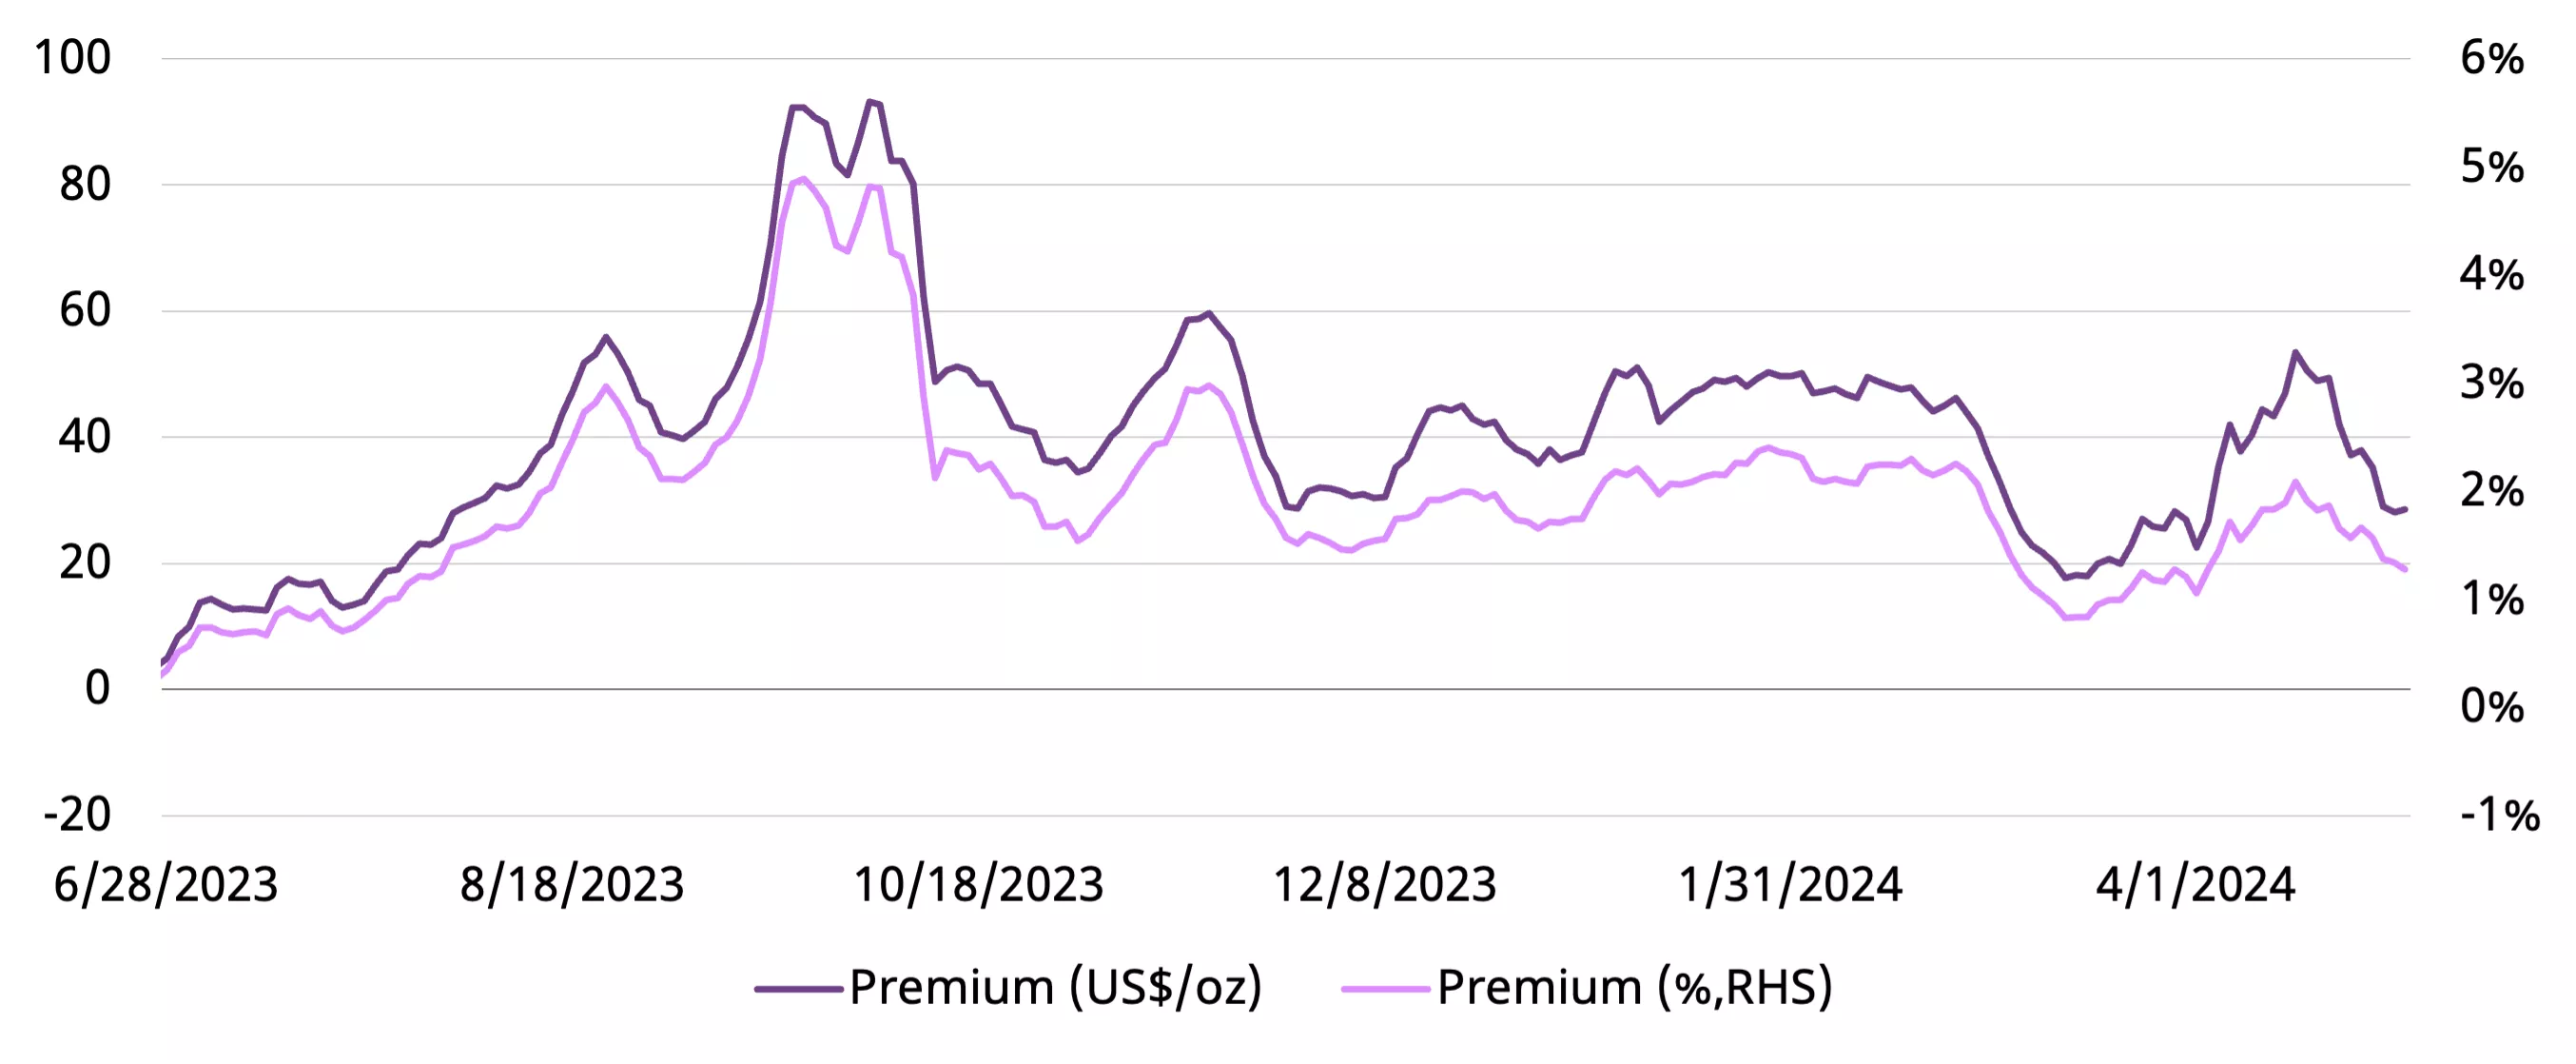 The monthly average spread between SHAUPM and LBMA Gold Price AM in US$/oz and %*